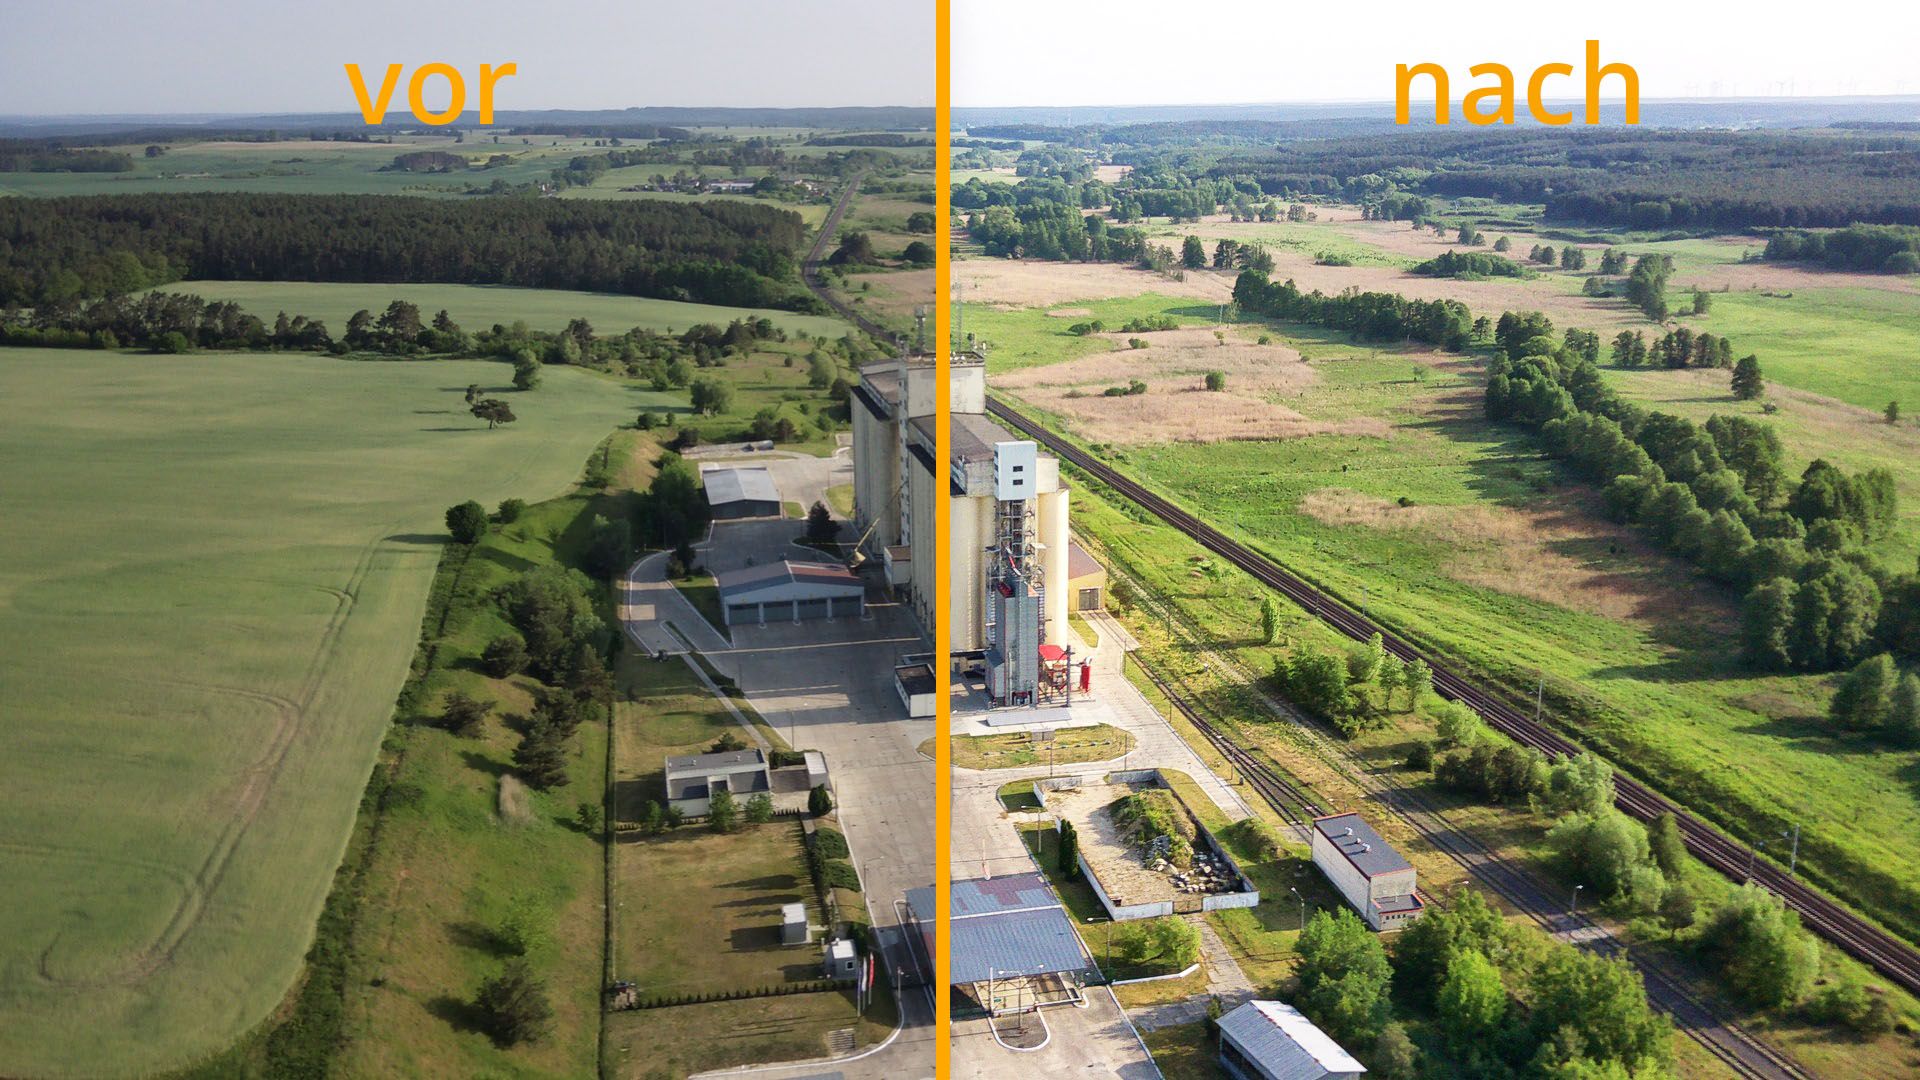 photo-from-drone-comparison-postrpoduction-before-after-de.jpg